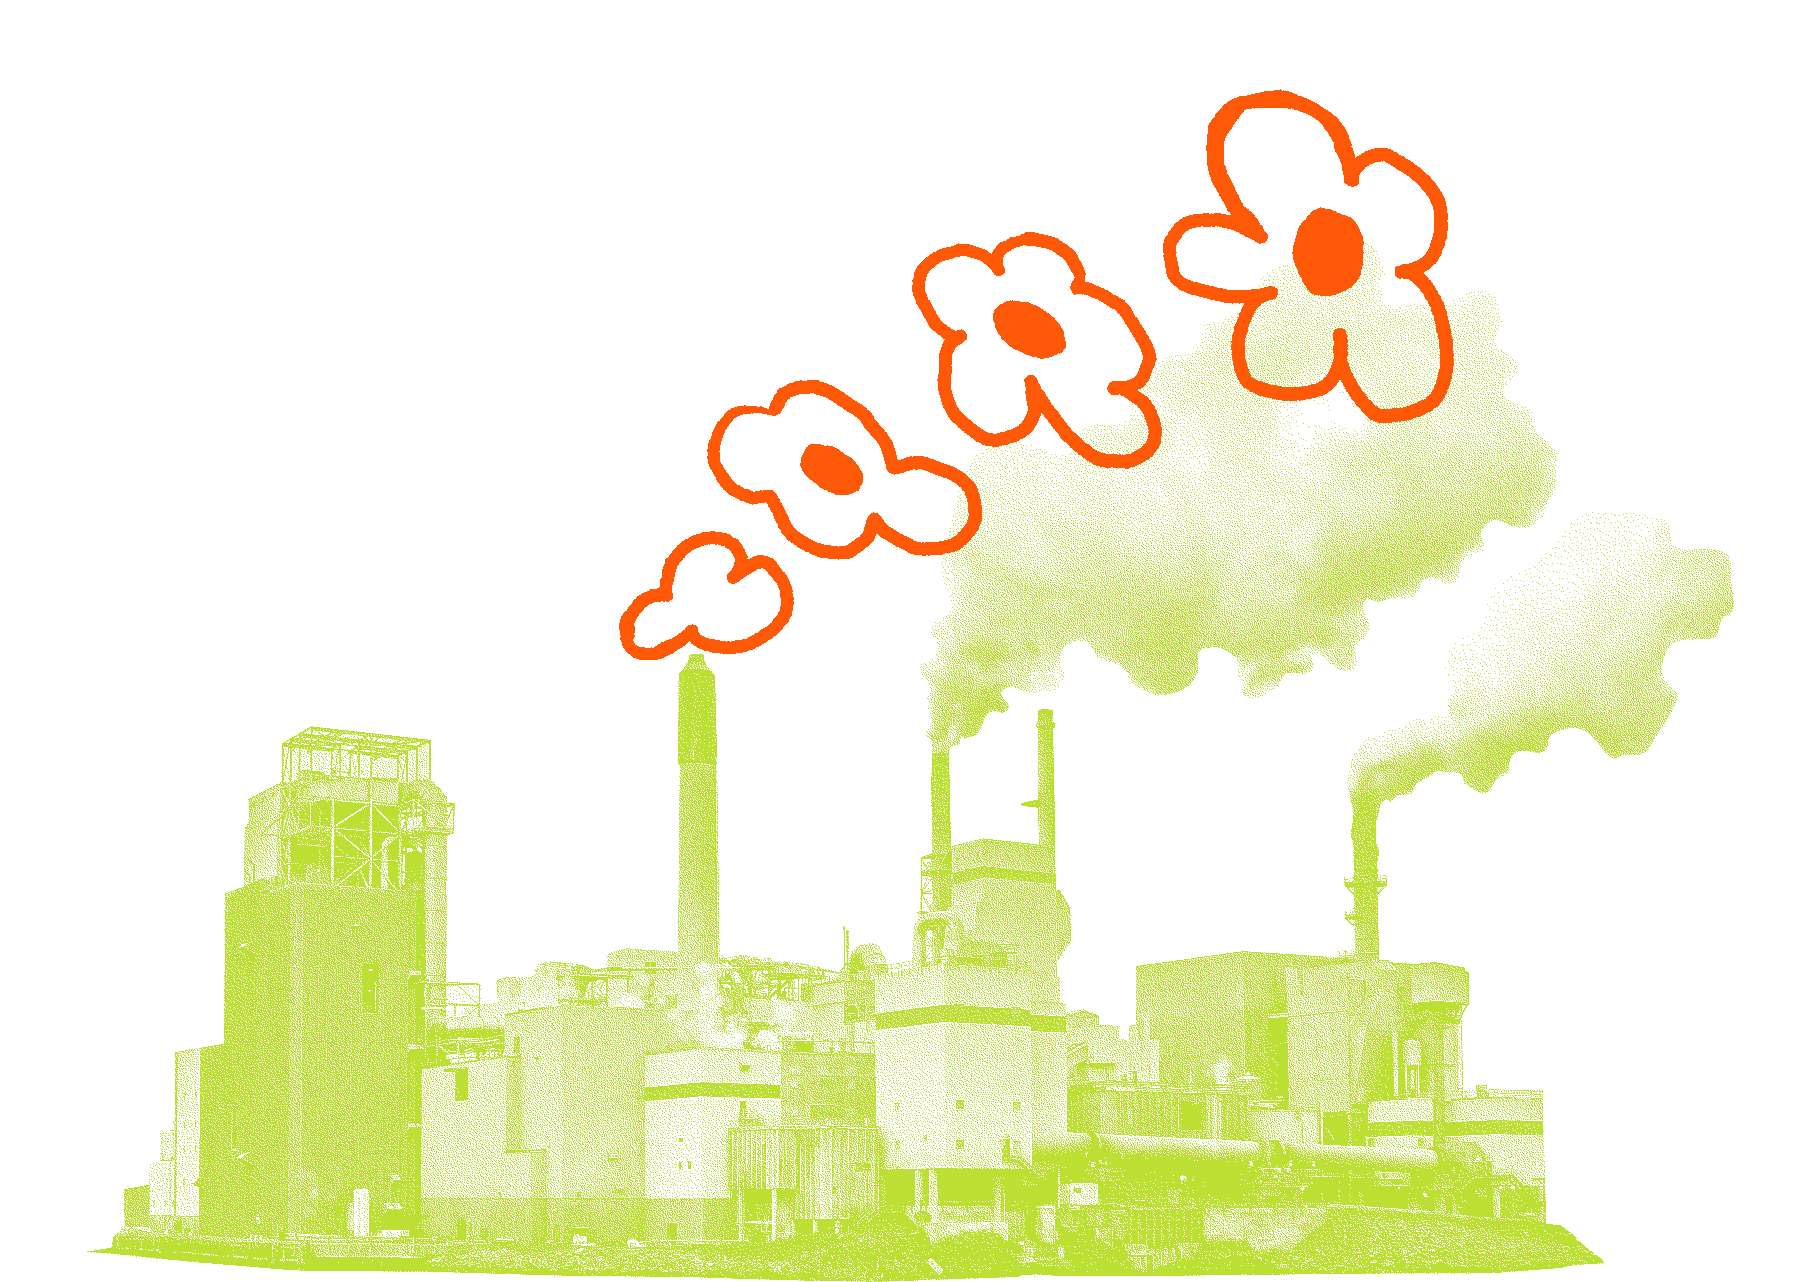 Animated graphic of a power plant